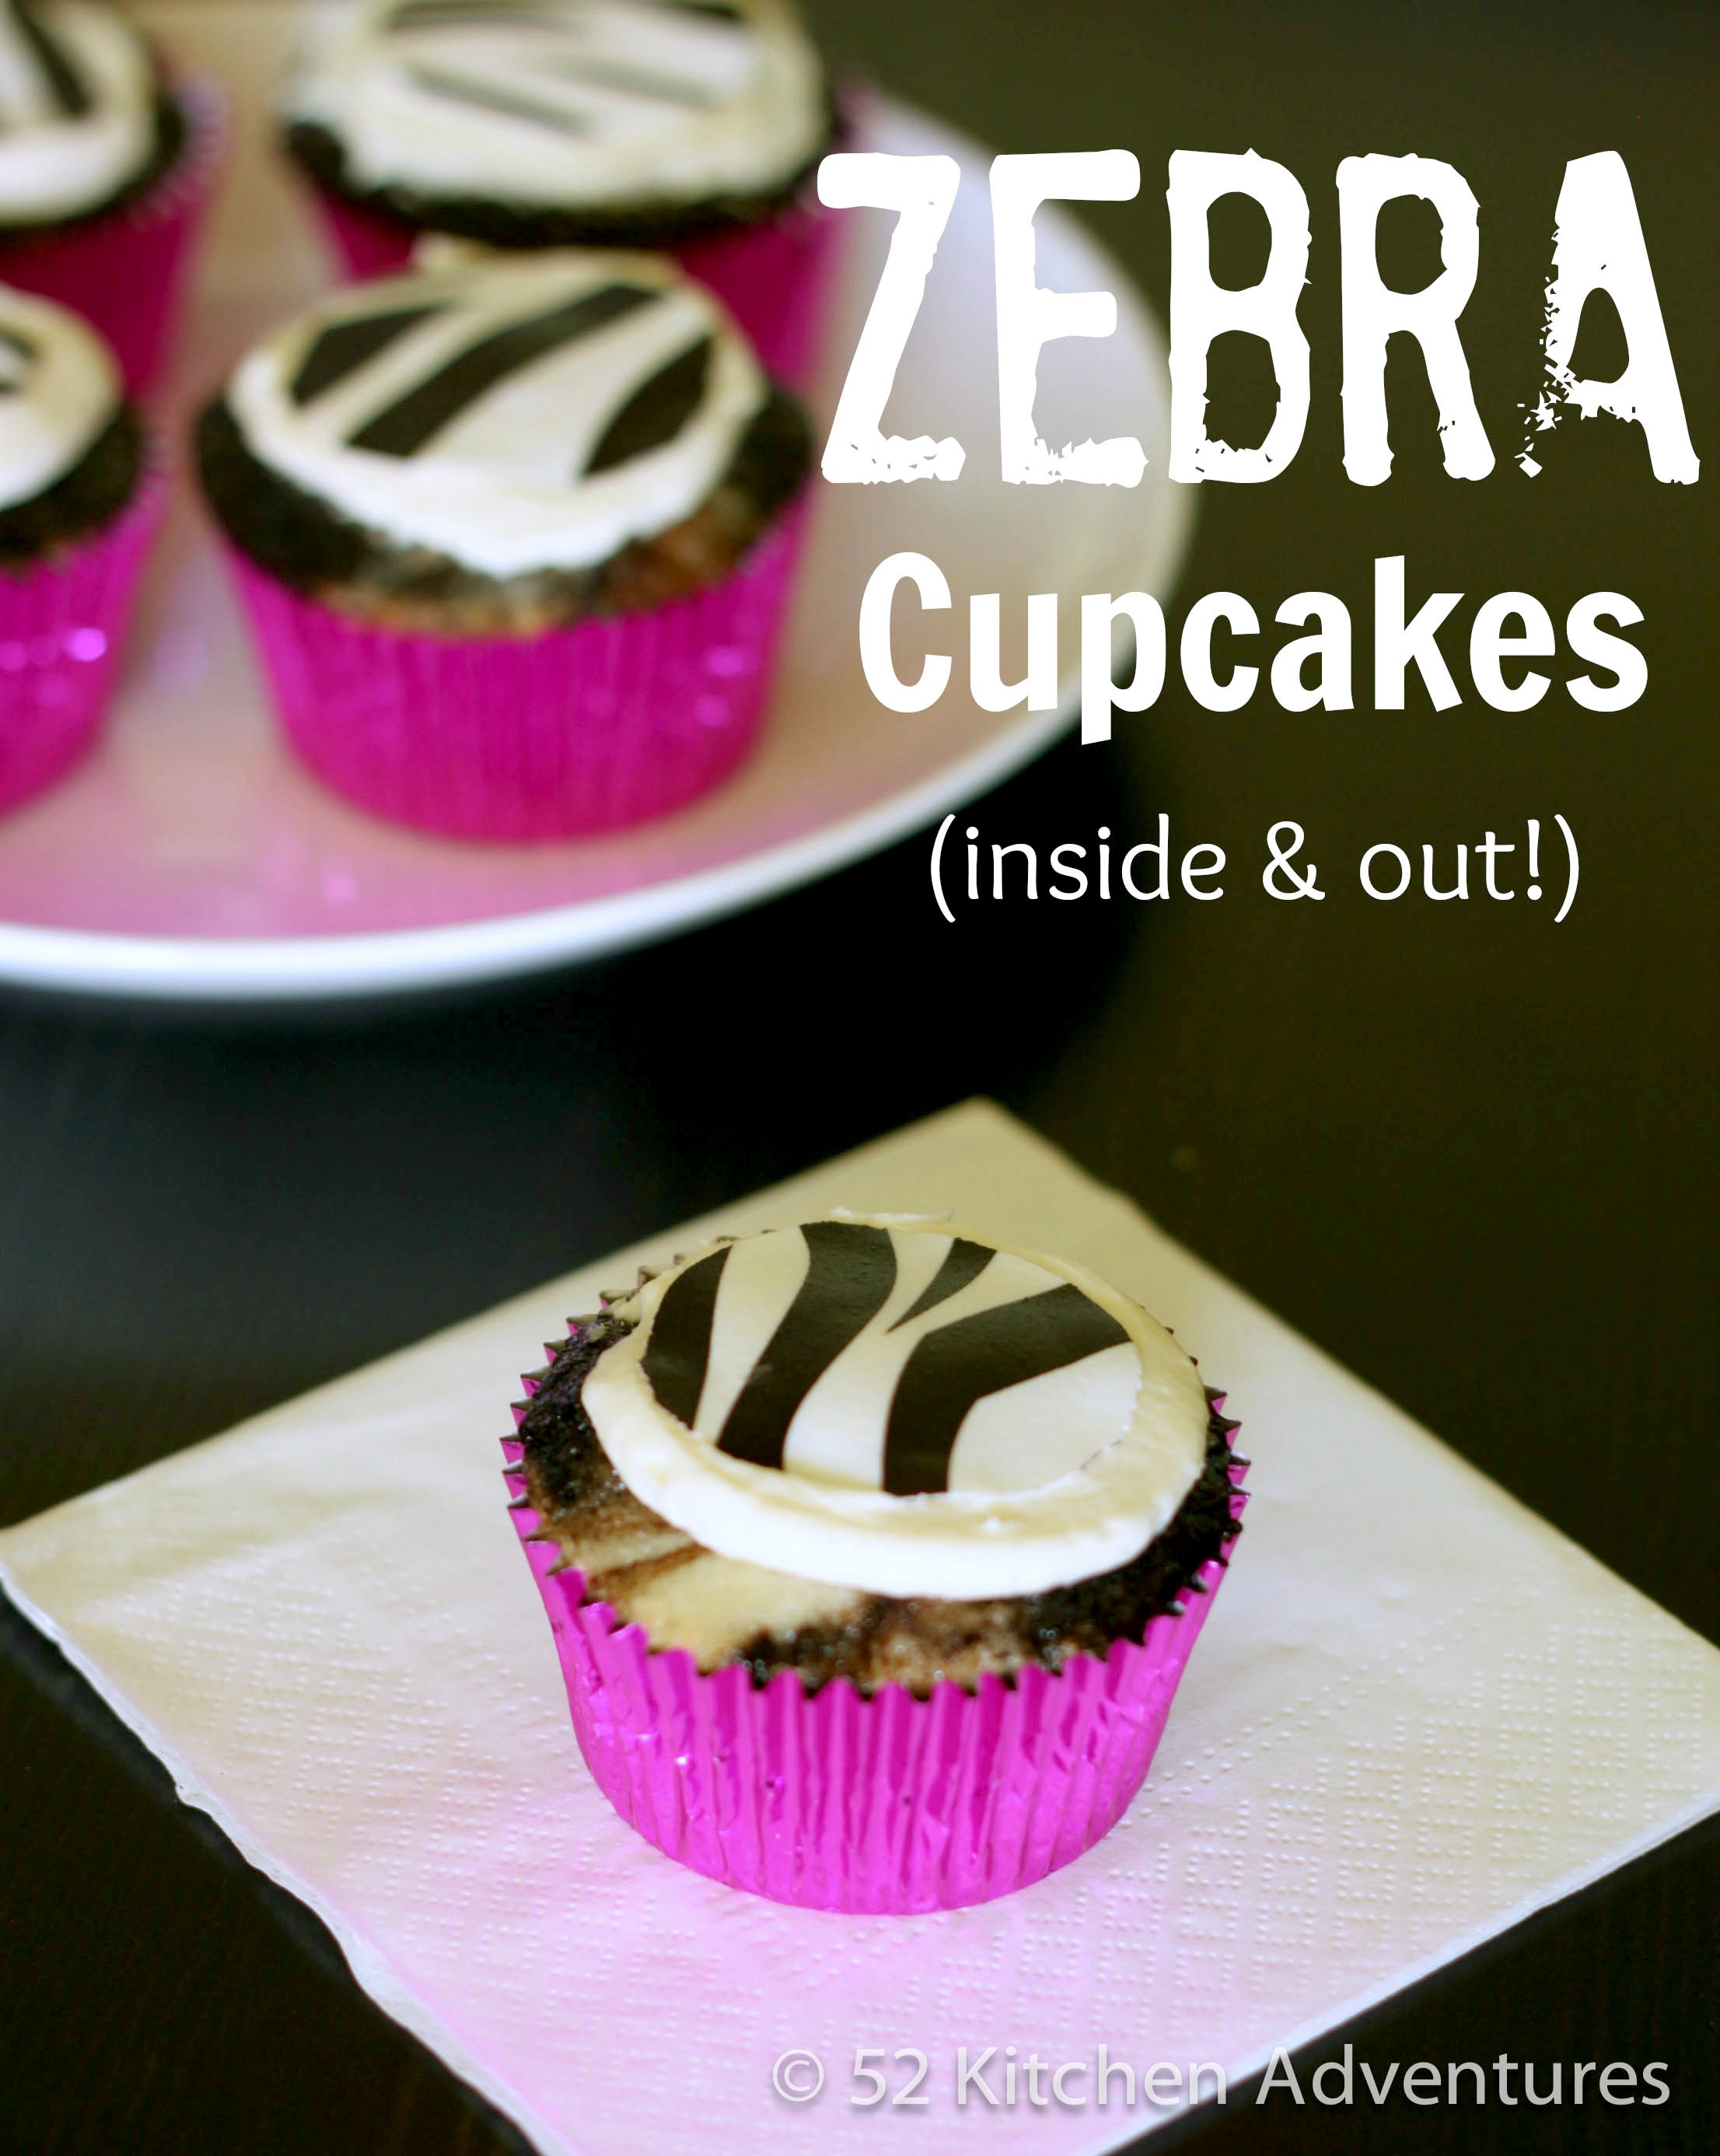 How to make zebra cupcakes (inside & out!)